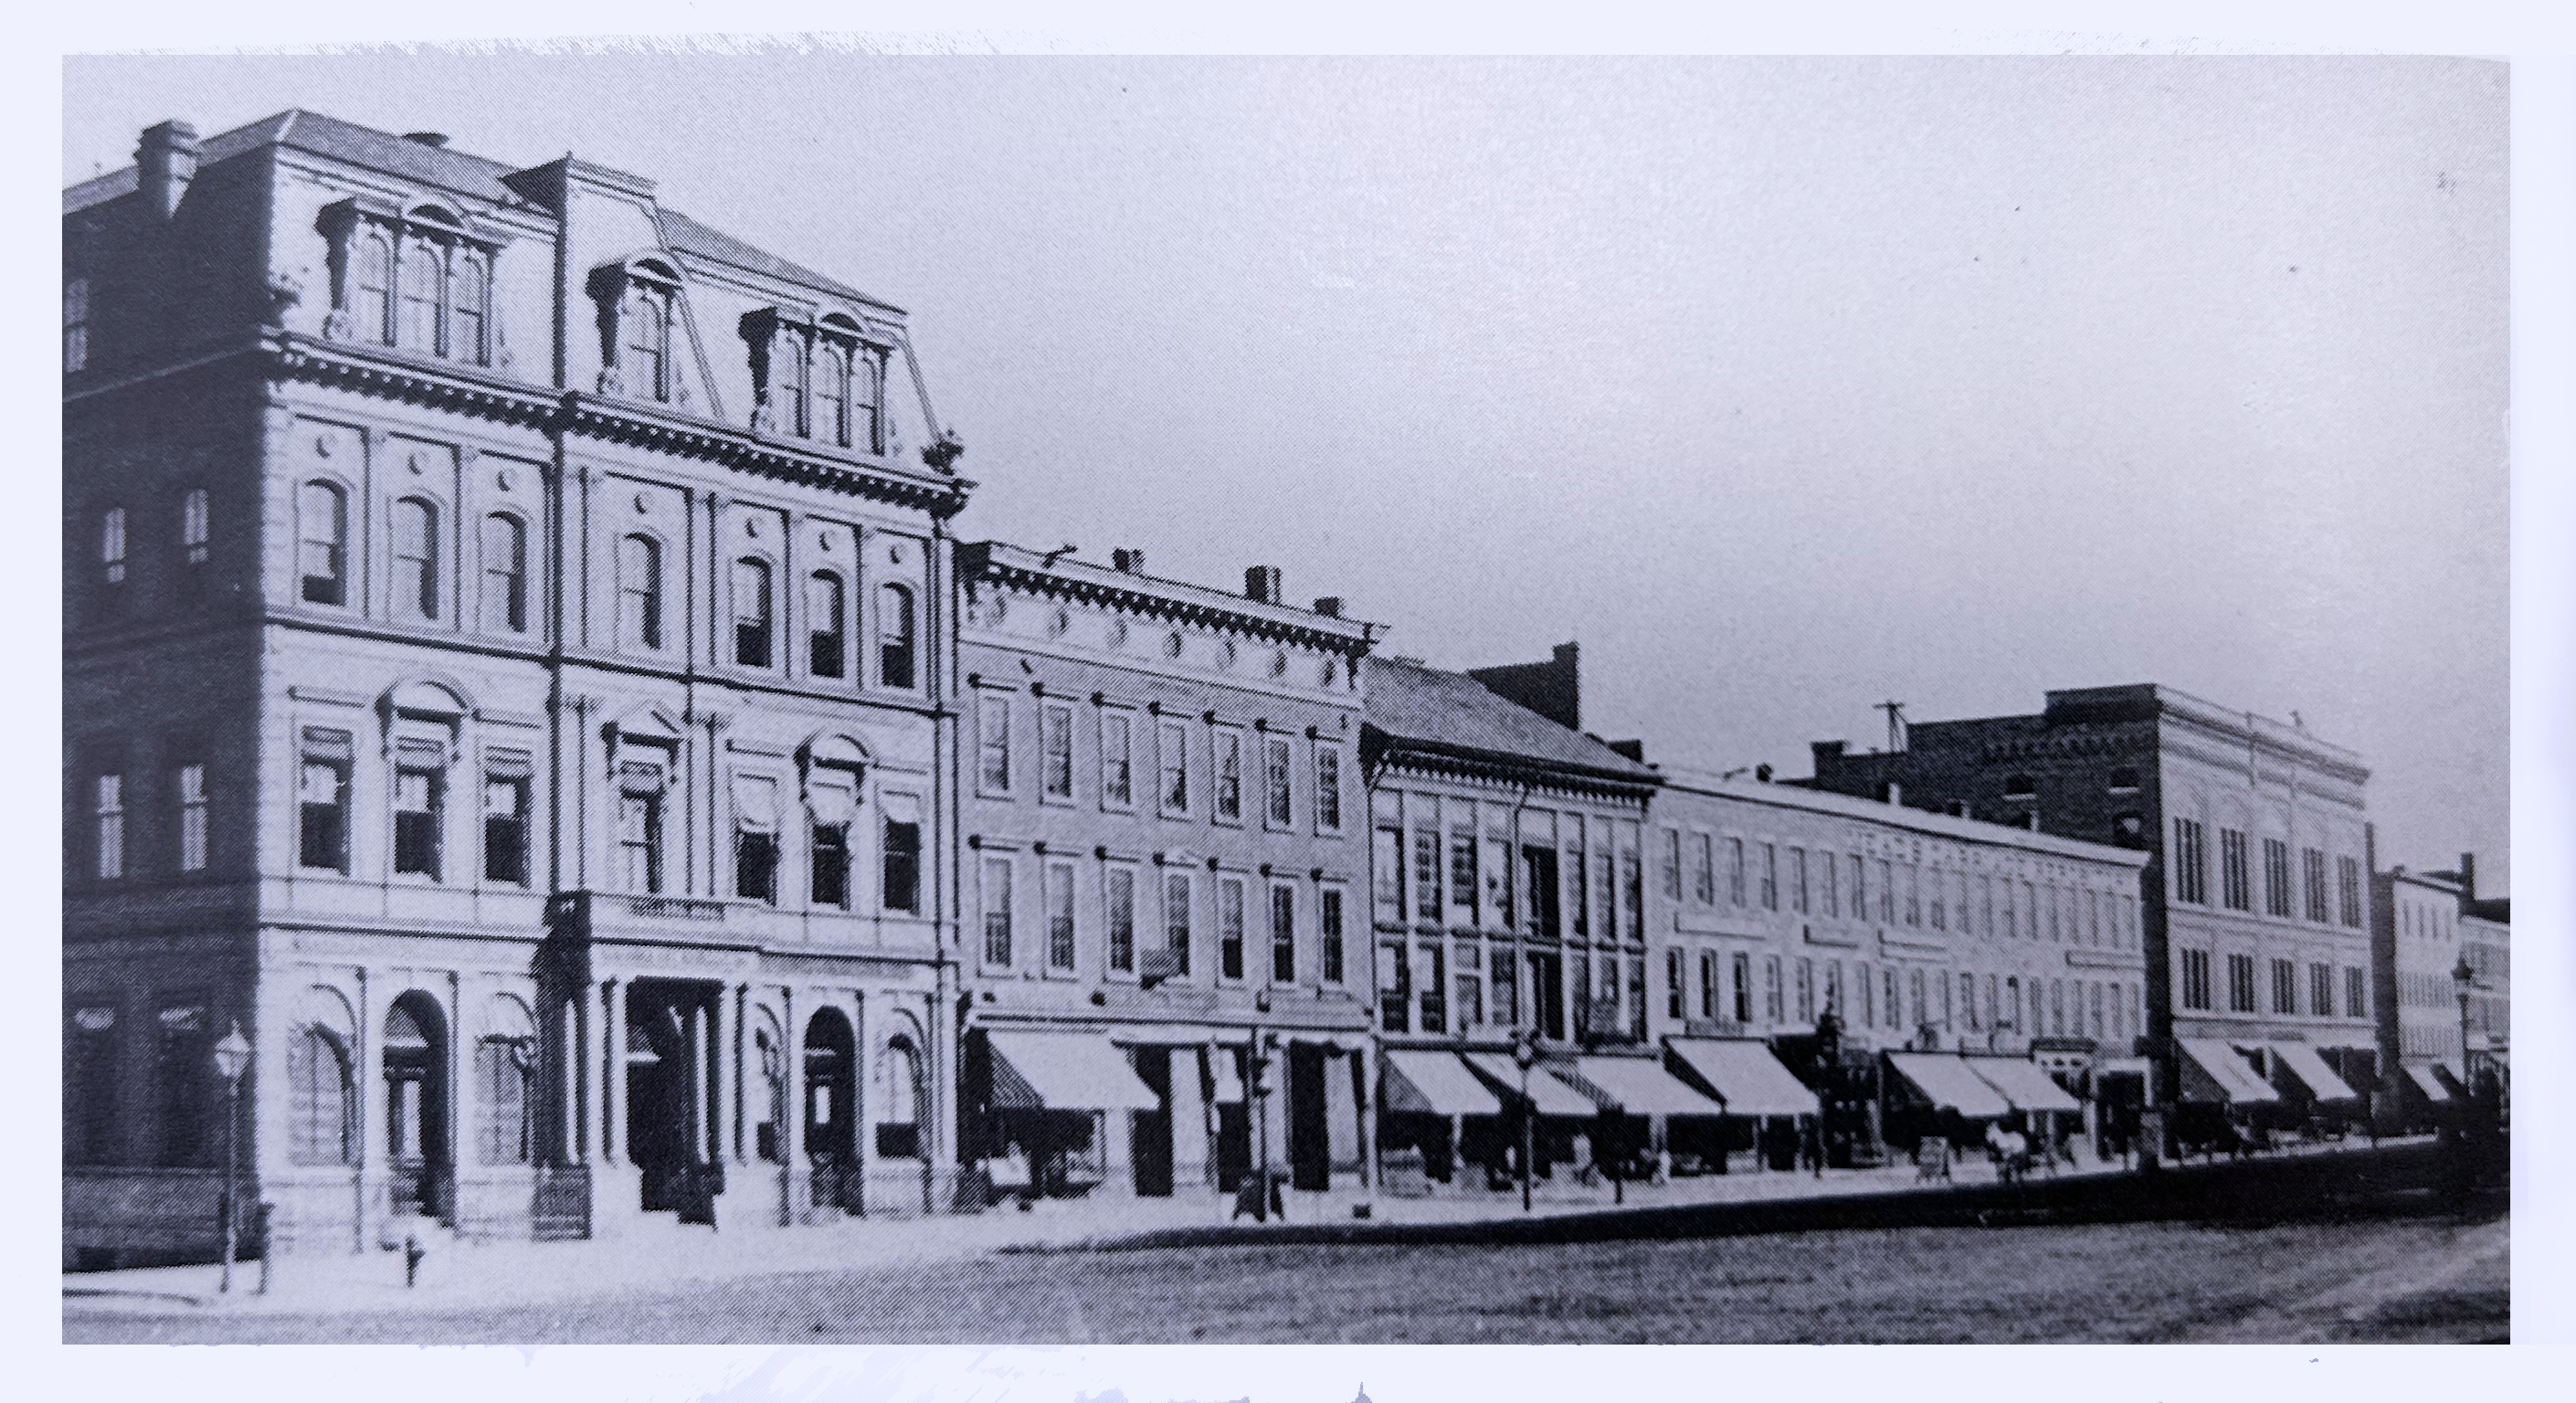 Pittsfield Cooperative Bank’s first location on North Street (second building on left)